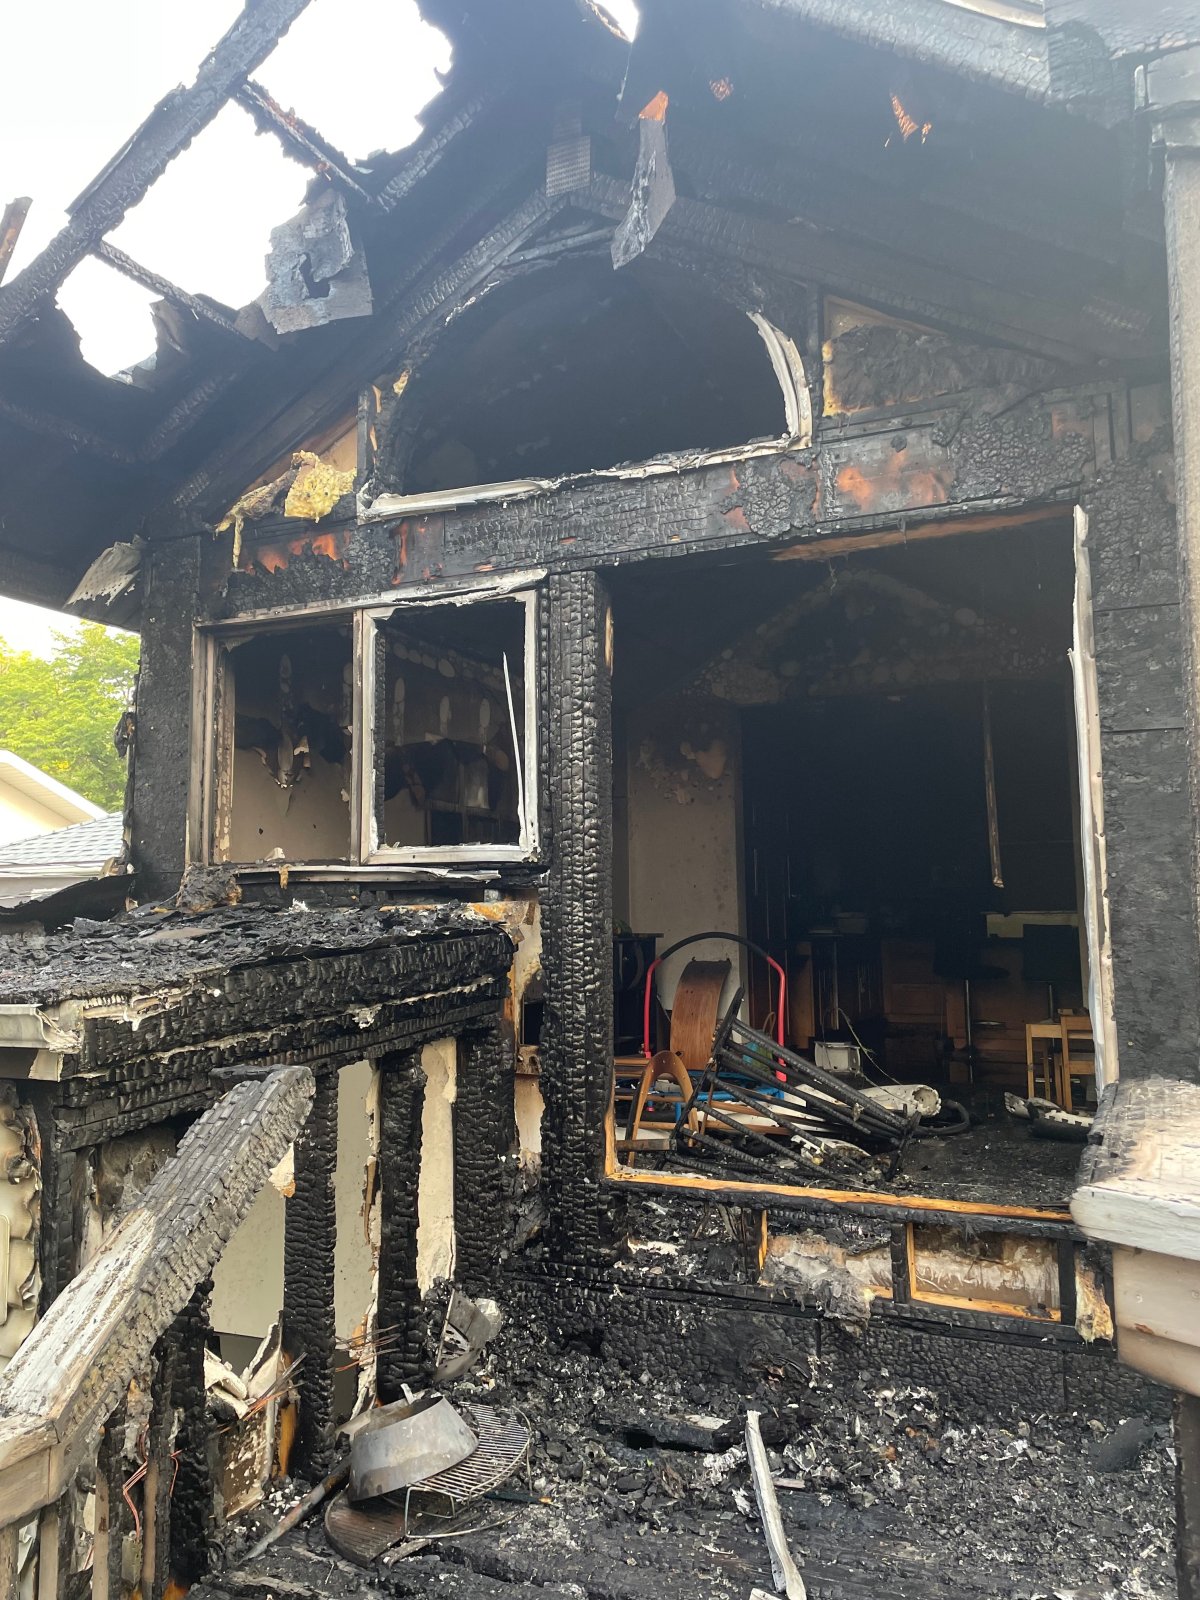 A fire early Friday morning caused $150,000 in damages in Saskatoon.